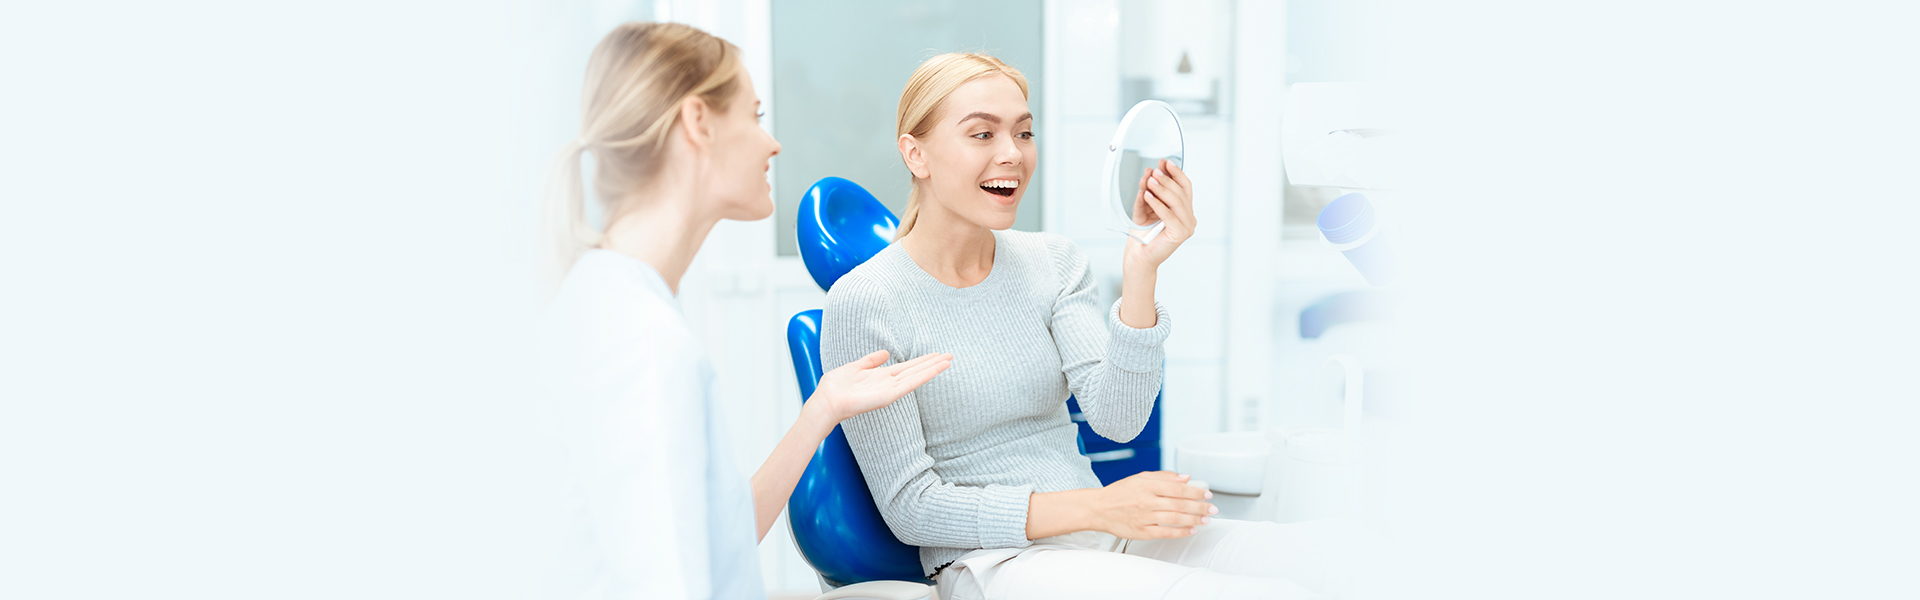 Display a Glowing Smile This Valentine with Dental Exam and Cleaning